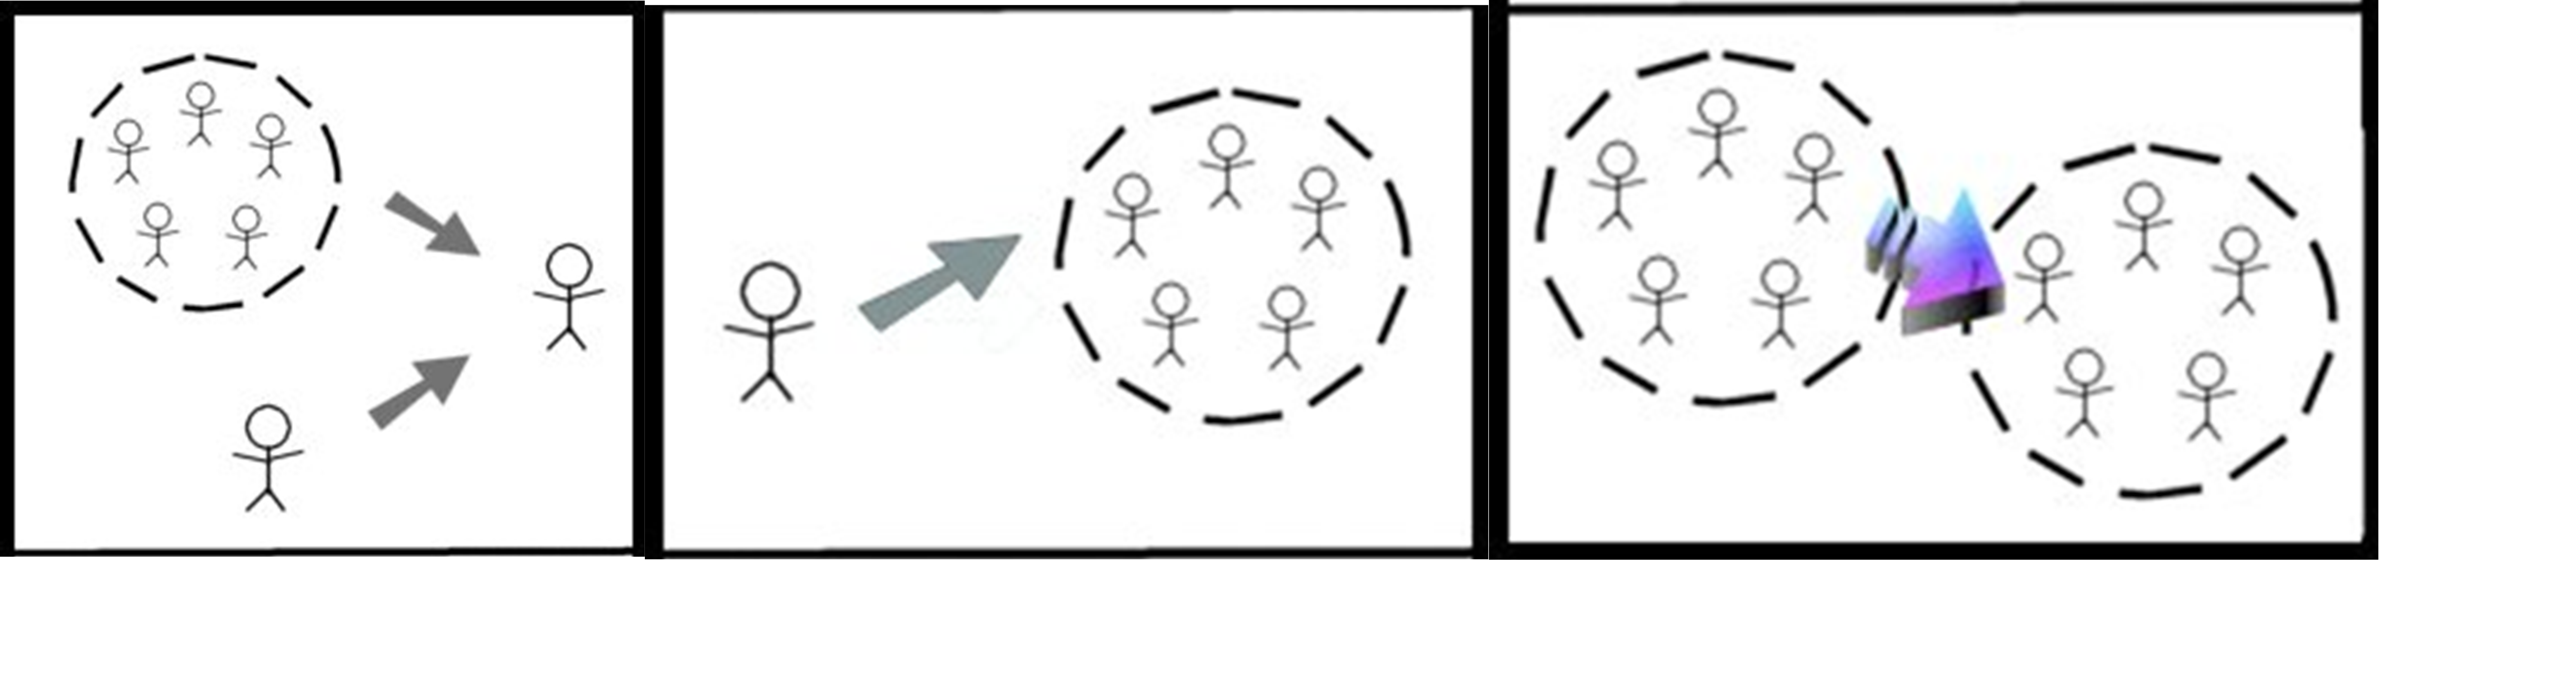 Three boxes, the first containing 5 stick people drawings with arrows to individual stick drawings. The second image shows an individual stick figure with an arrow pointing to 5 stick-figure persons in a circle, and the final image shows 5 stick-figure individuals inside a circle with an arrow pointing to a circle containing 5 additional stick-figure persons